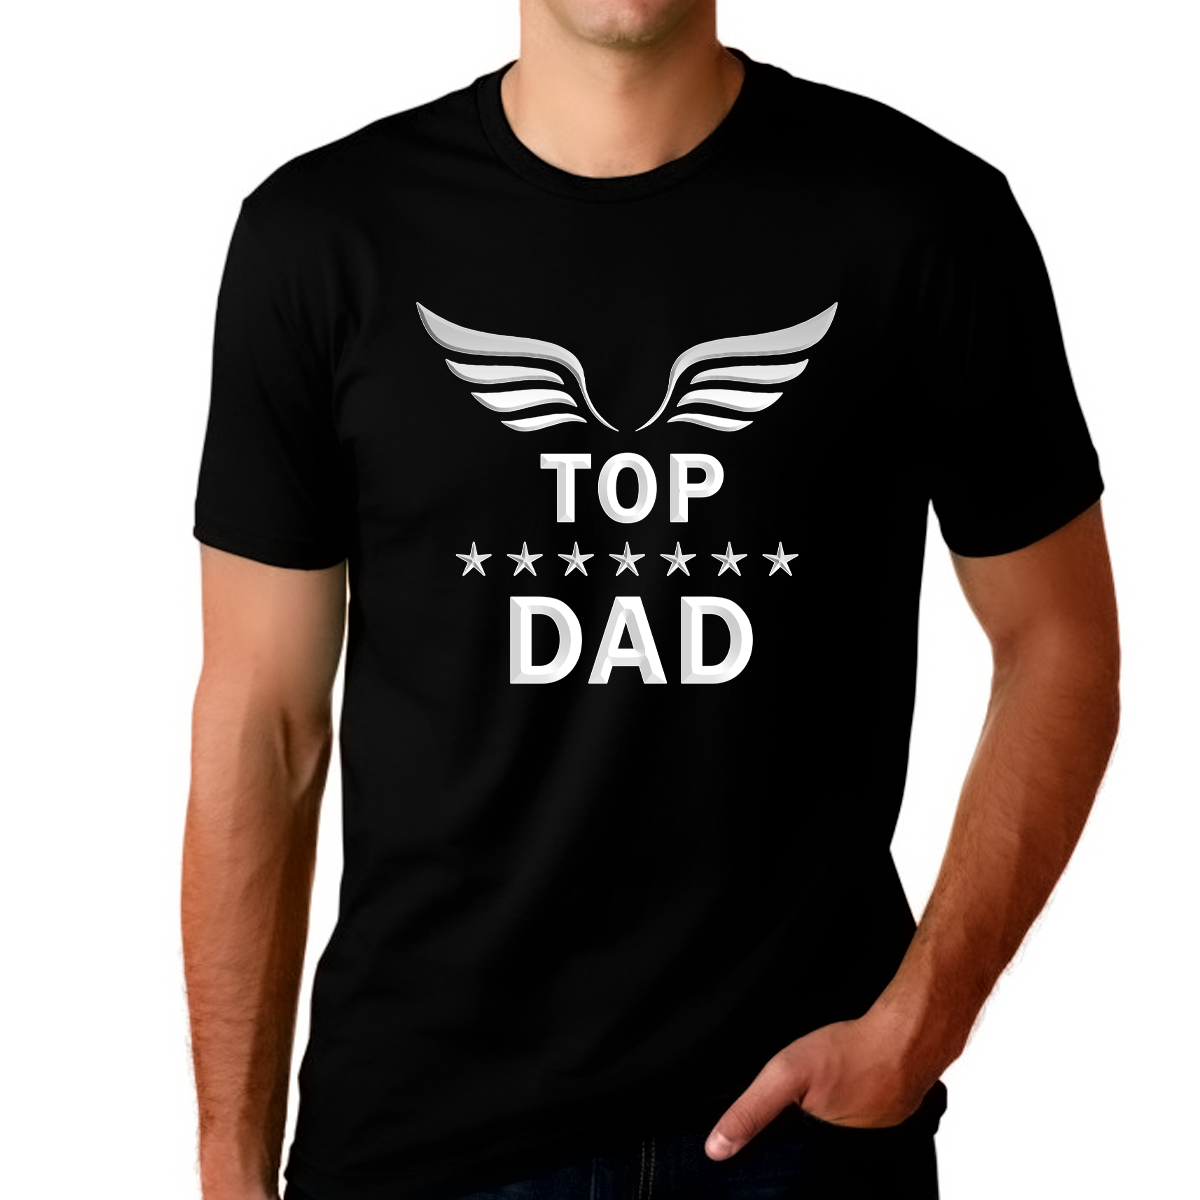 Fathers Day Shirts for Men - Top Dad Shirt - Fathers Day Gifts - Fathers Day Funny Dad Shirts